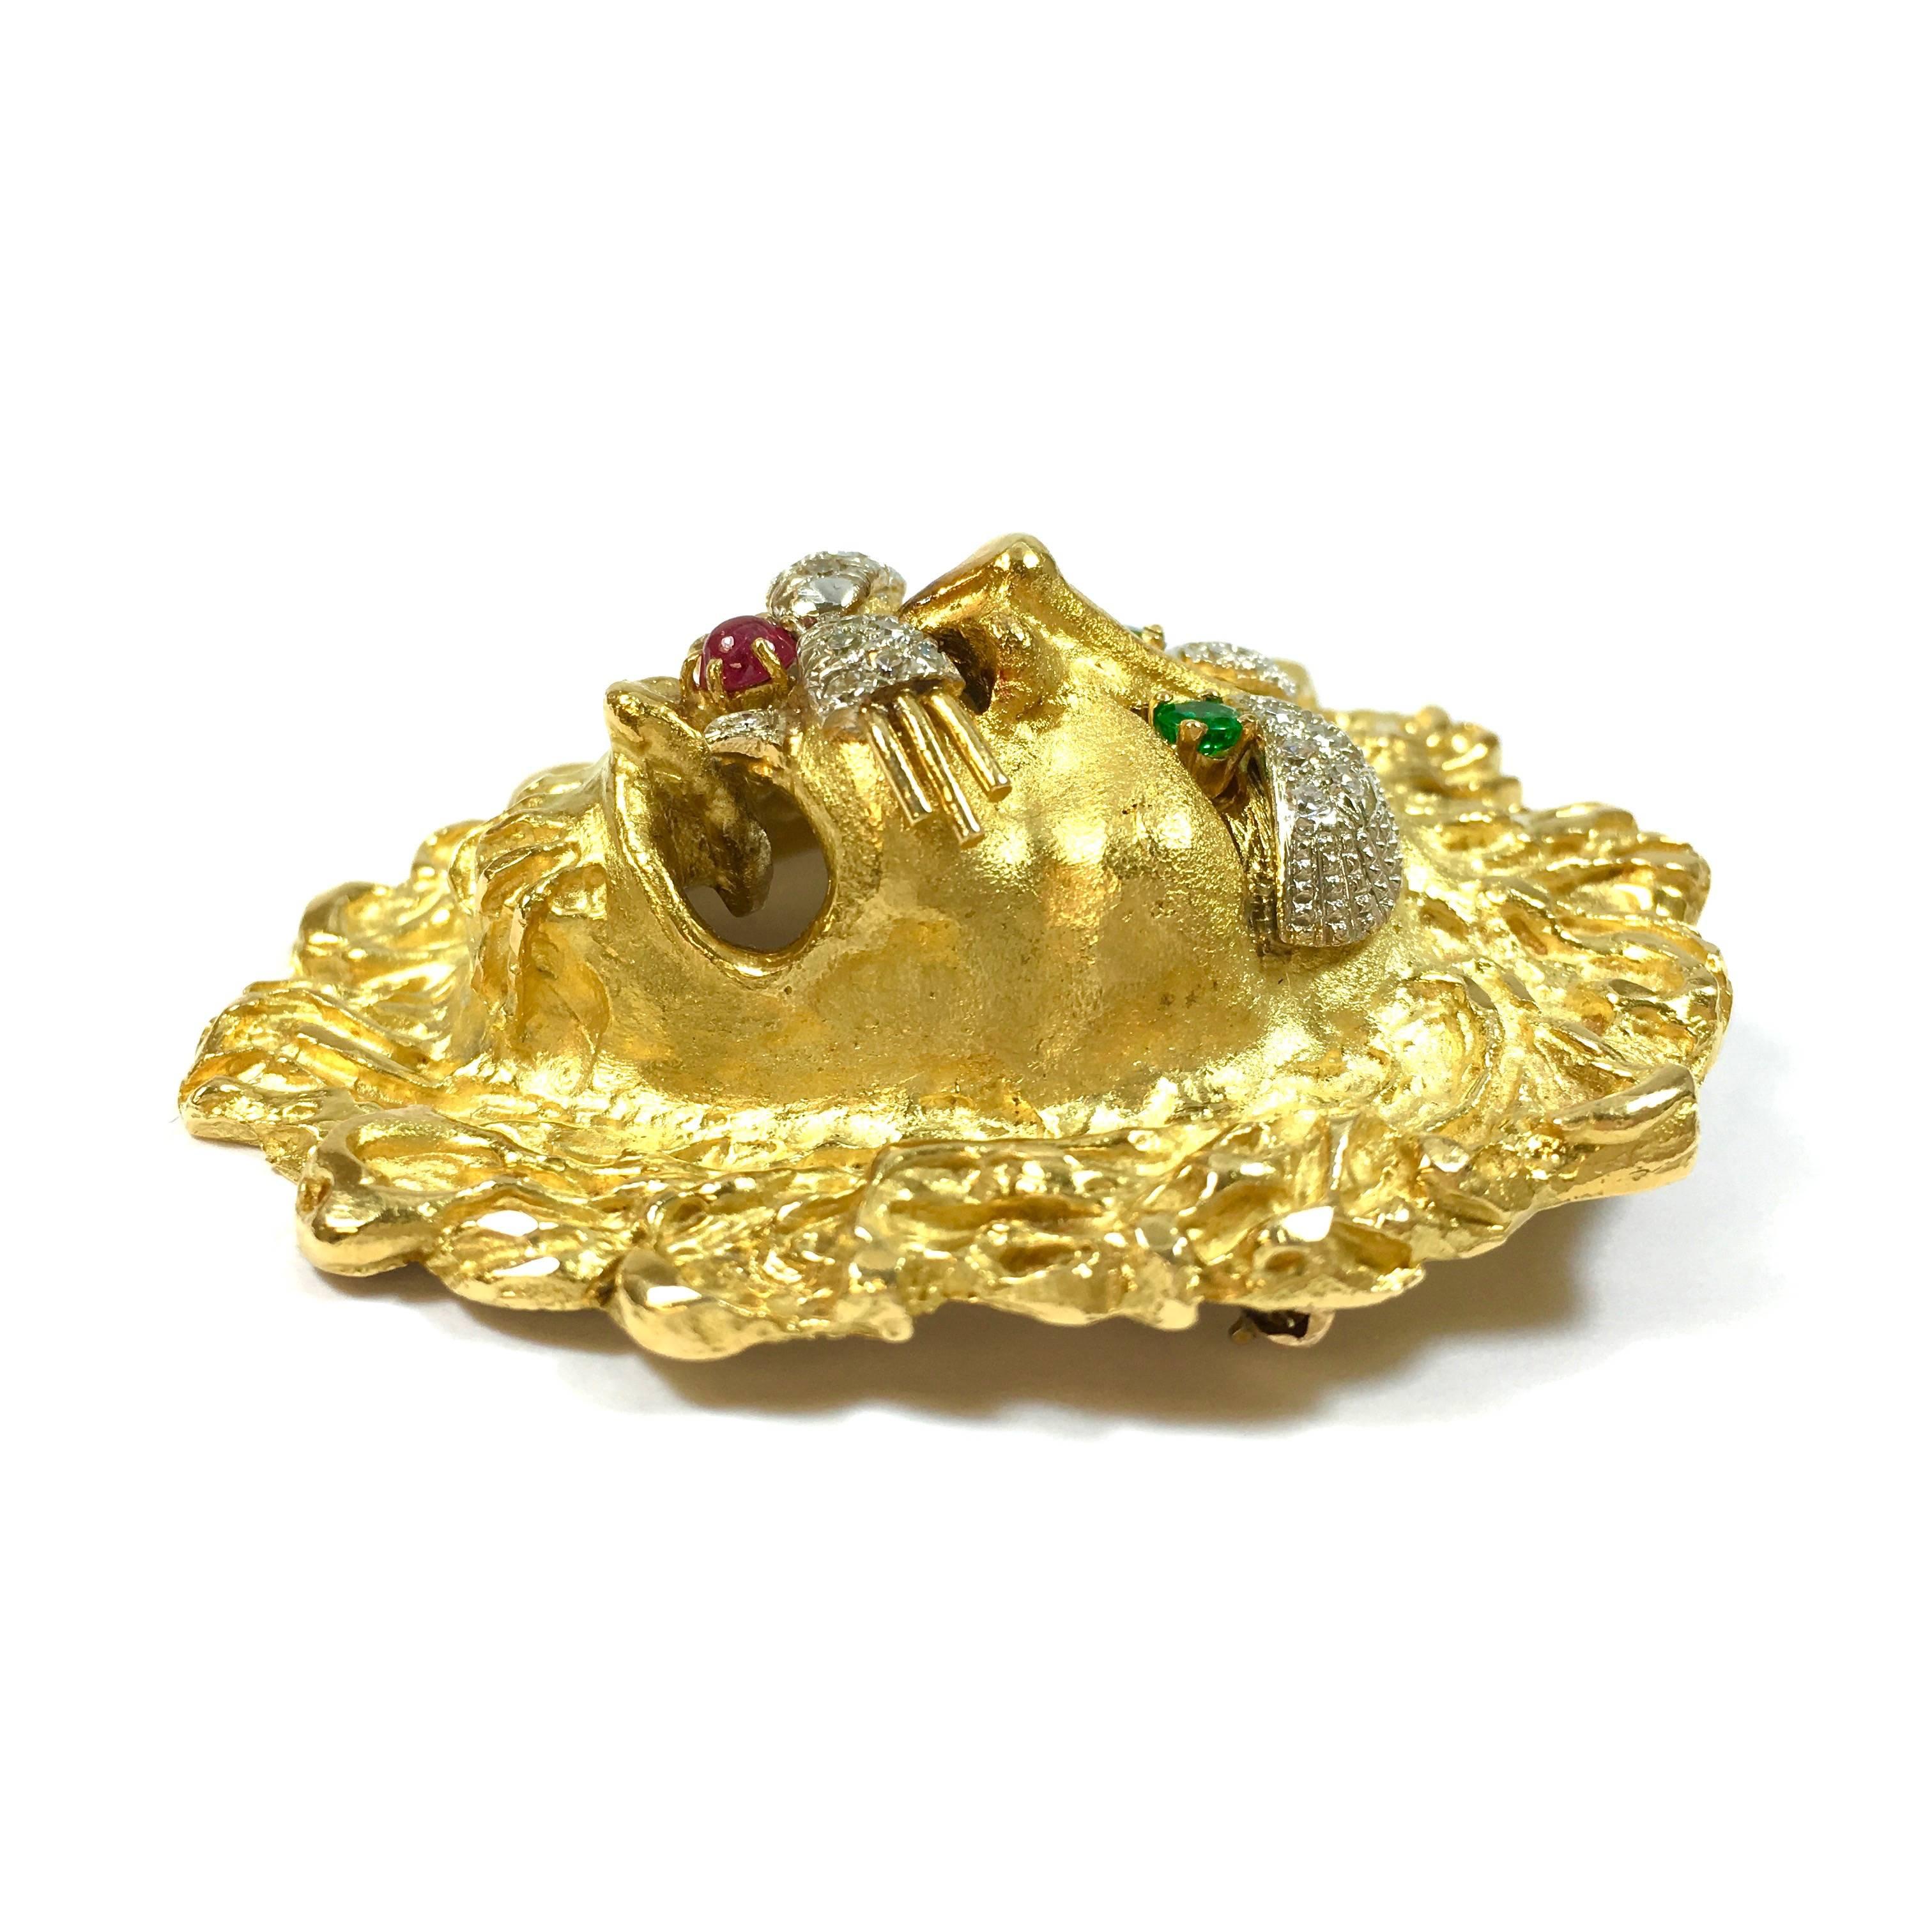 Large 18K yellow gold lion brooch pendant by Hammerman Brothers.
Set with teo round cut emeralds, a round cabochon ruby and 24 single cut diamonds.
Measurements: 2 1/2